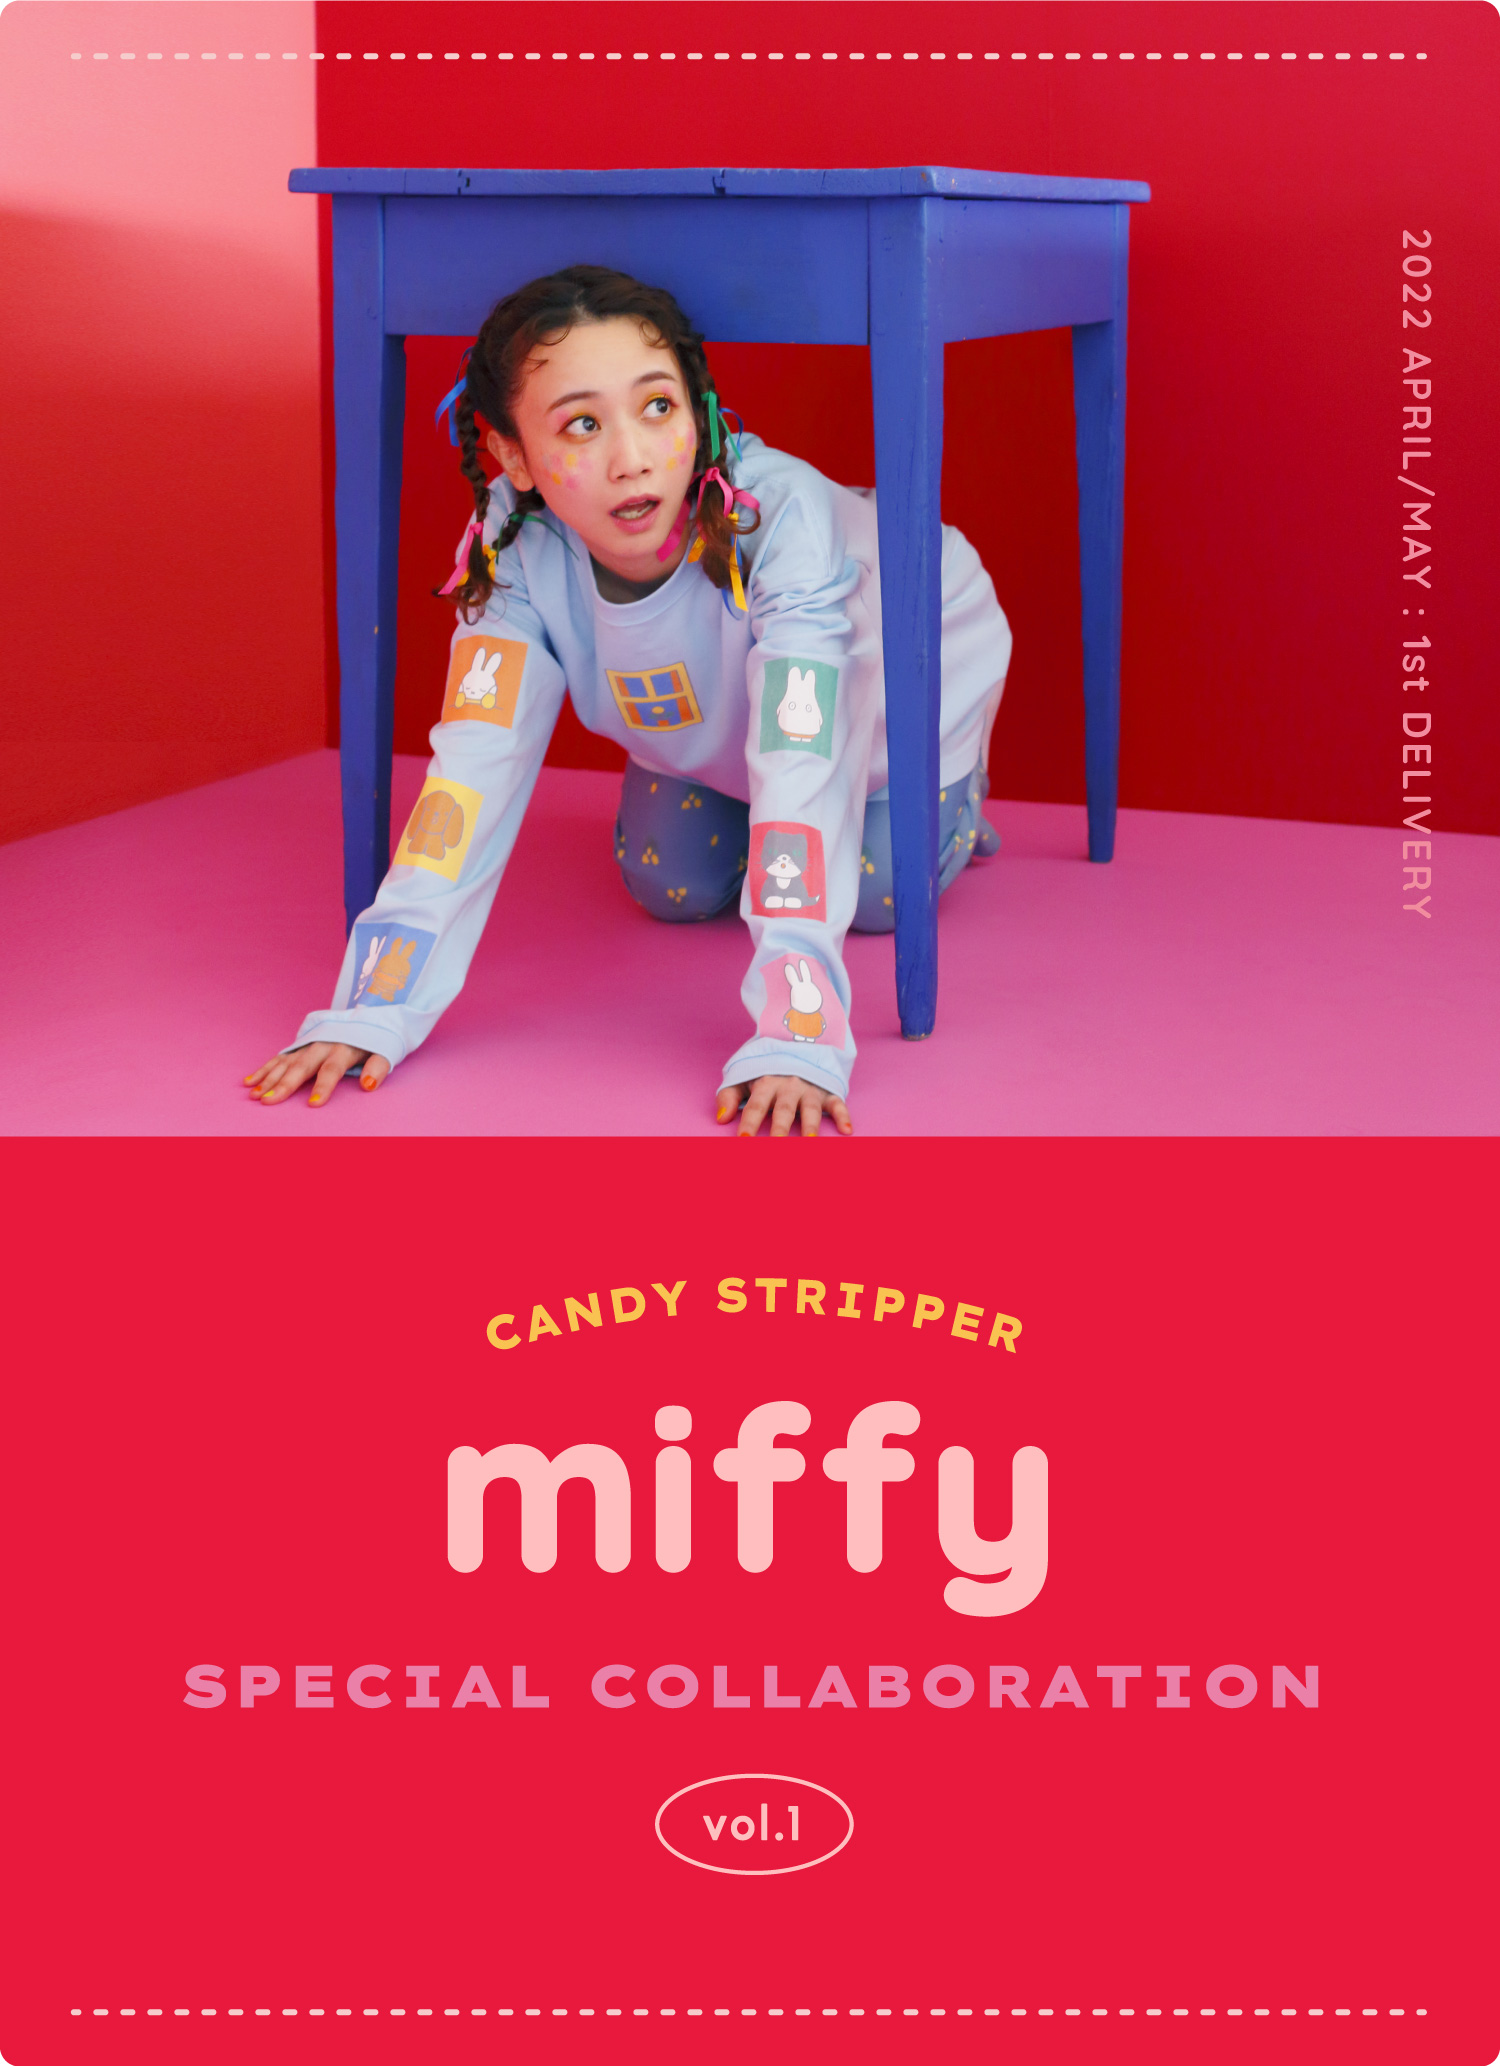 Candy Stripper miffy special collaboration